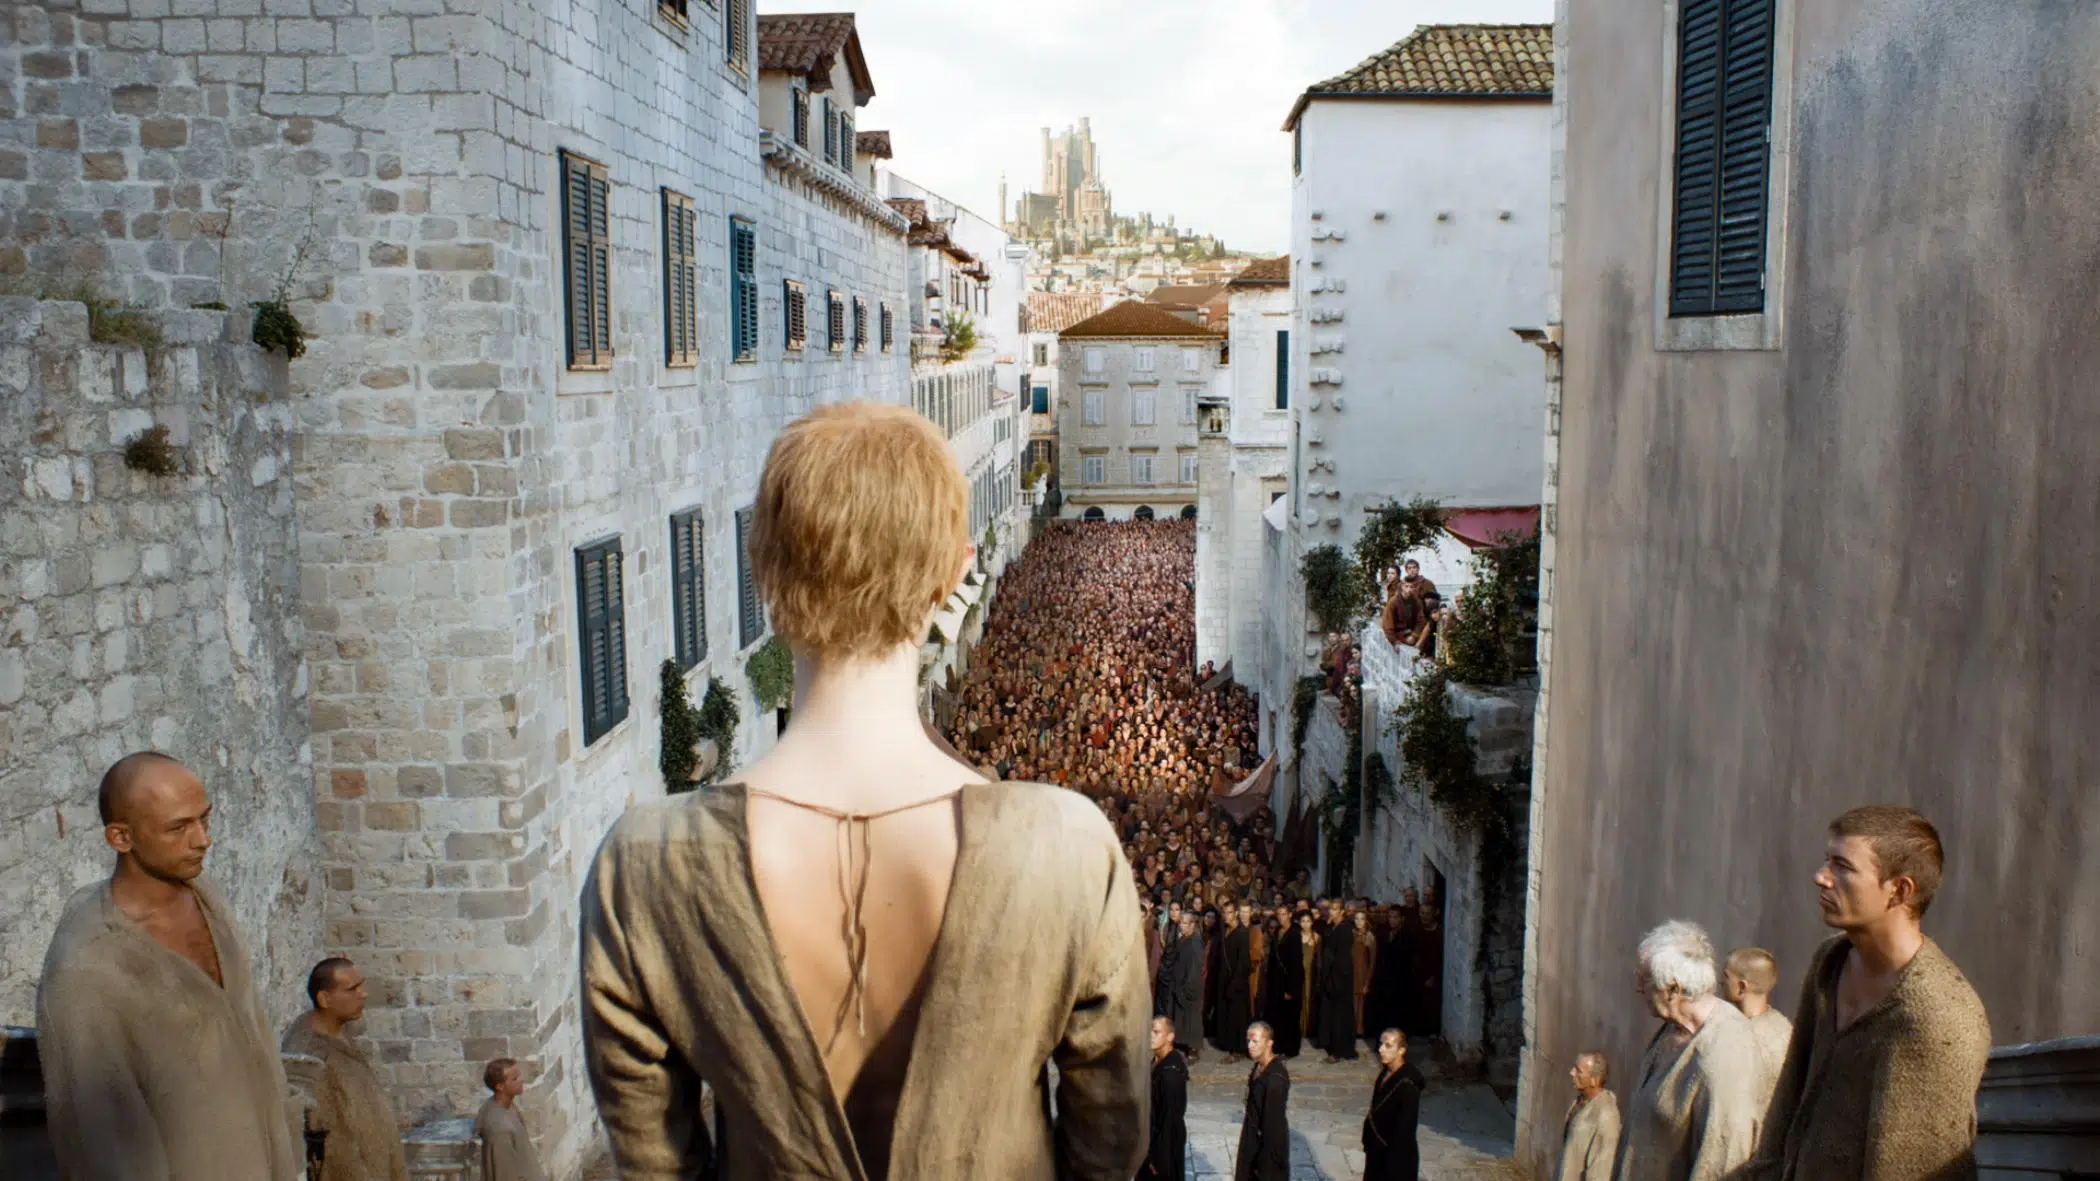 Game of Thrones Dubrovnik filming locations